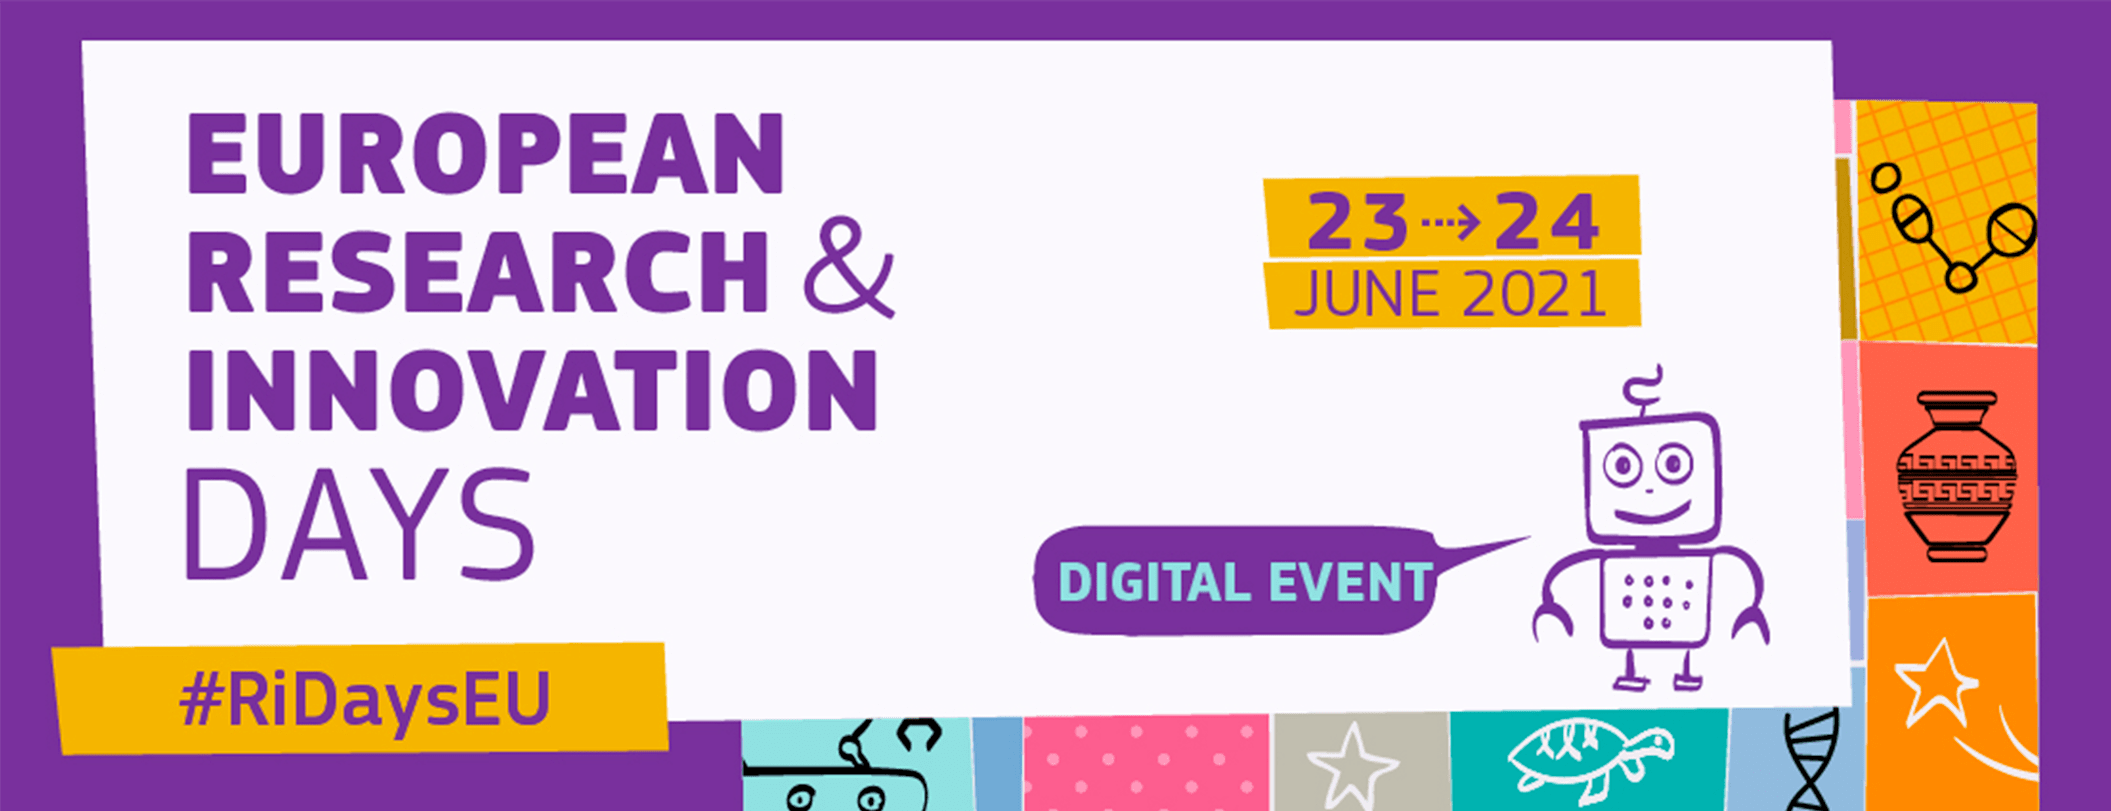 Draft Programme - European Research and Innovation Days 2021 - 23-24 June